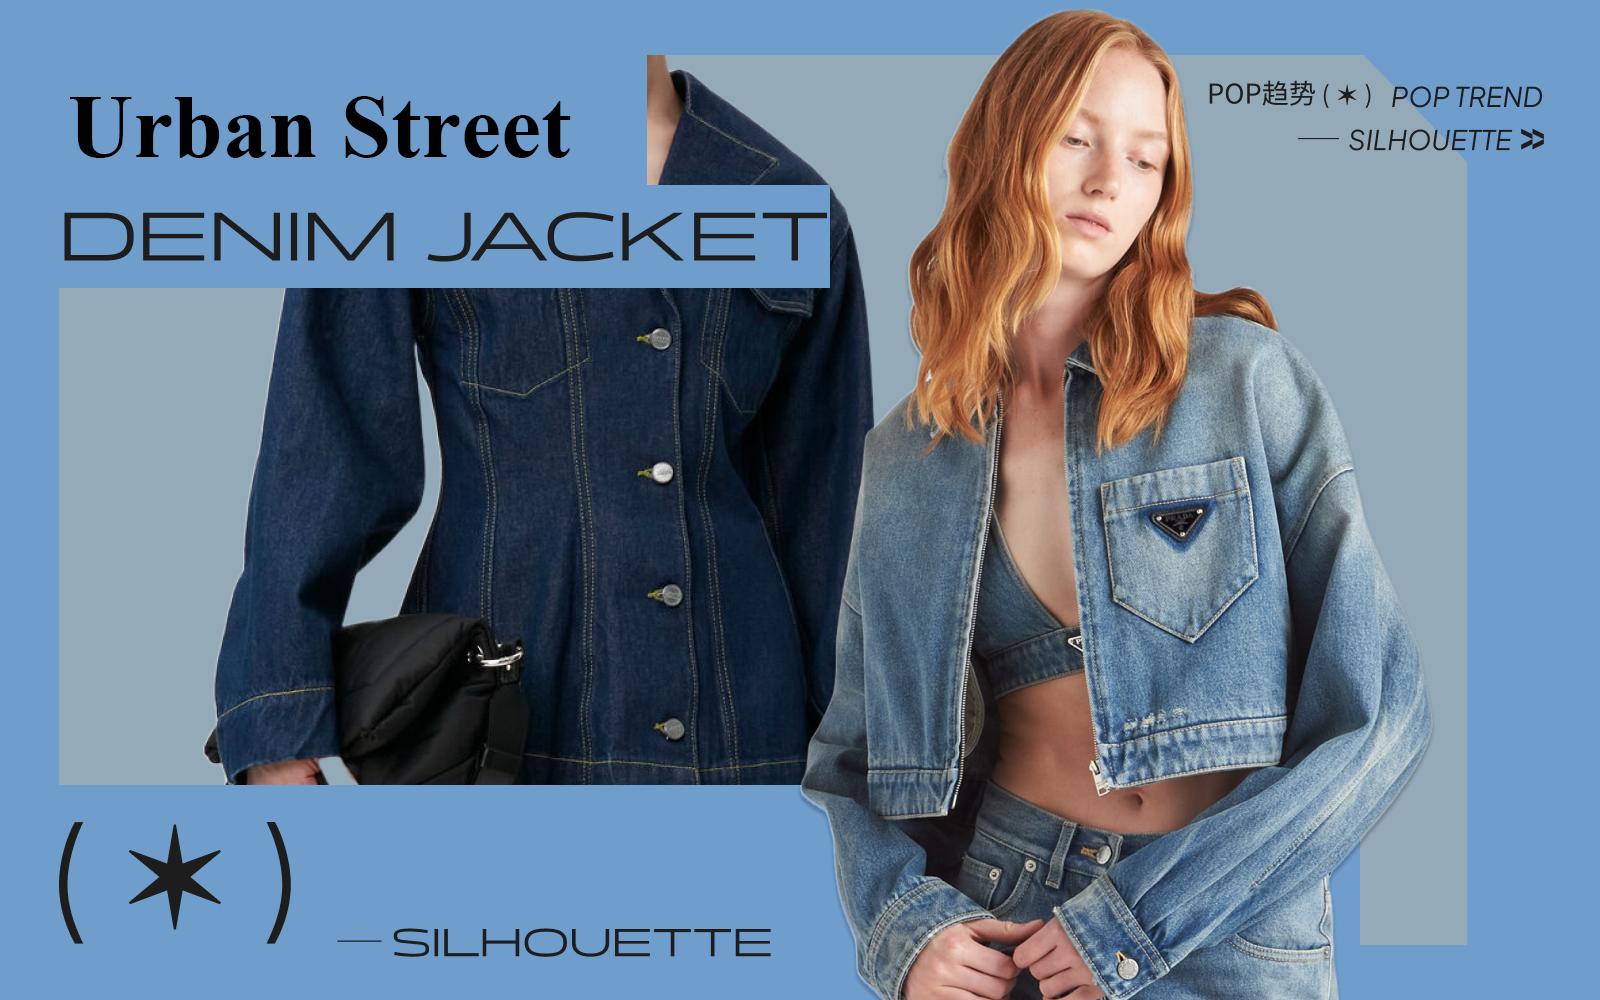 Urban Streets -- The Silhouette Trend for Denim Jacket